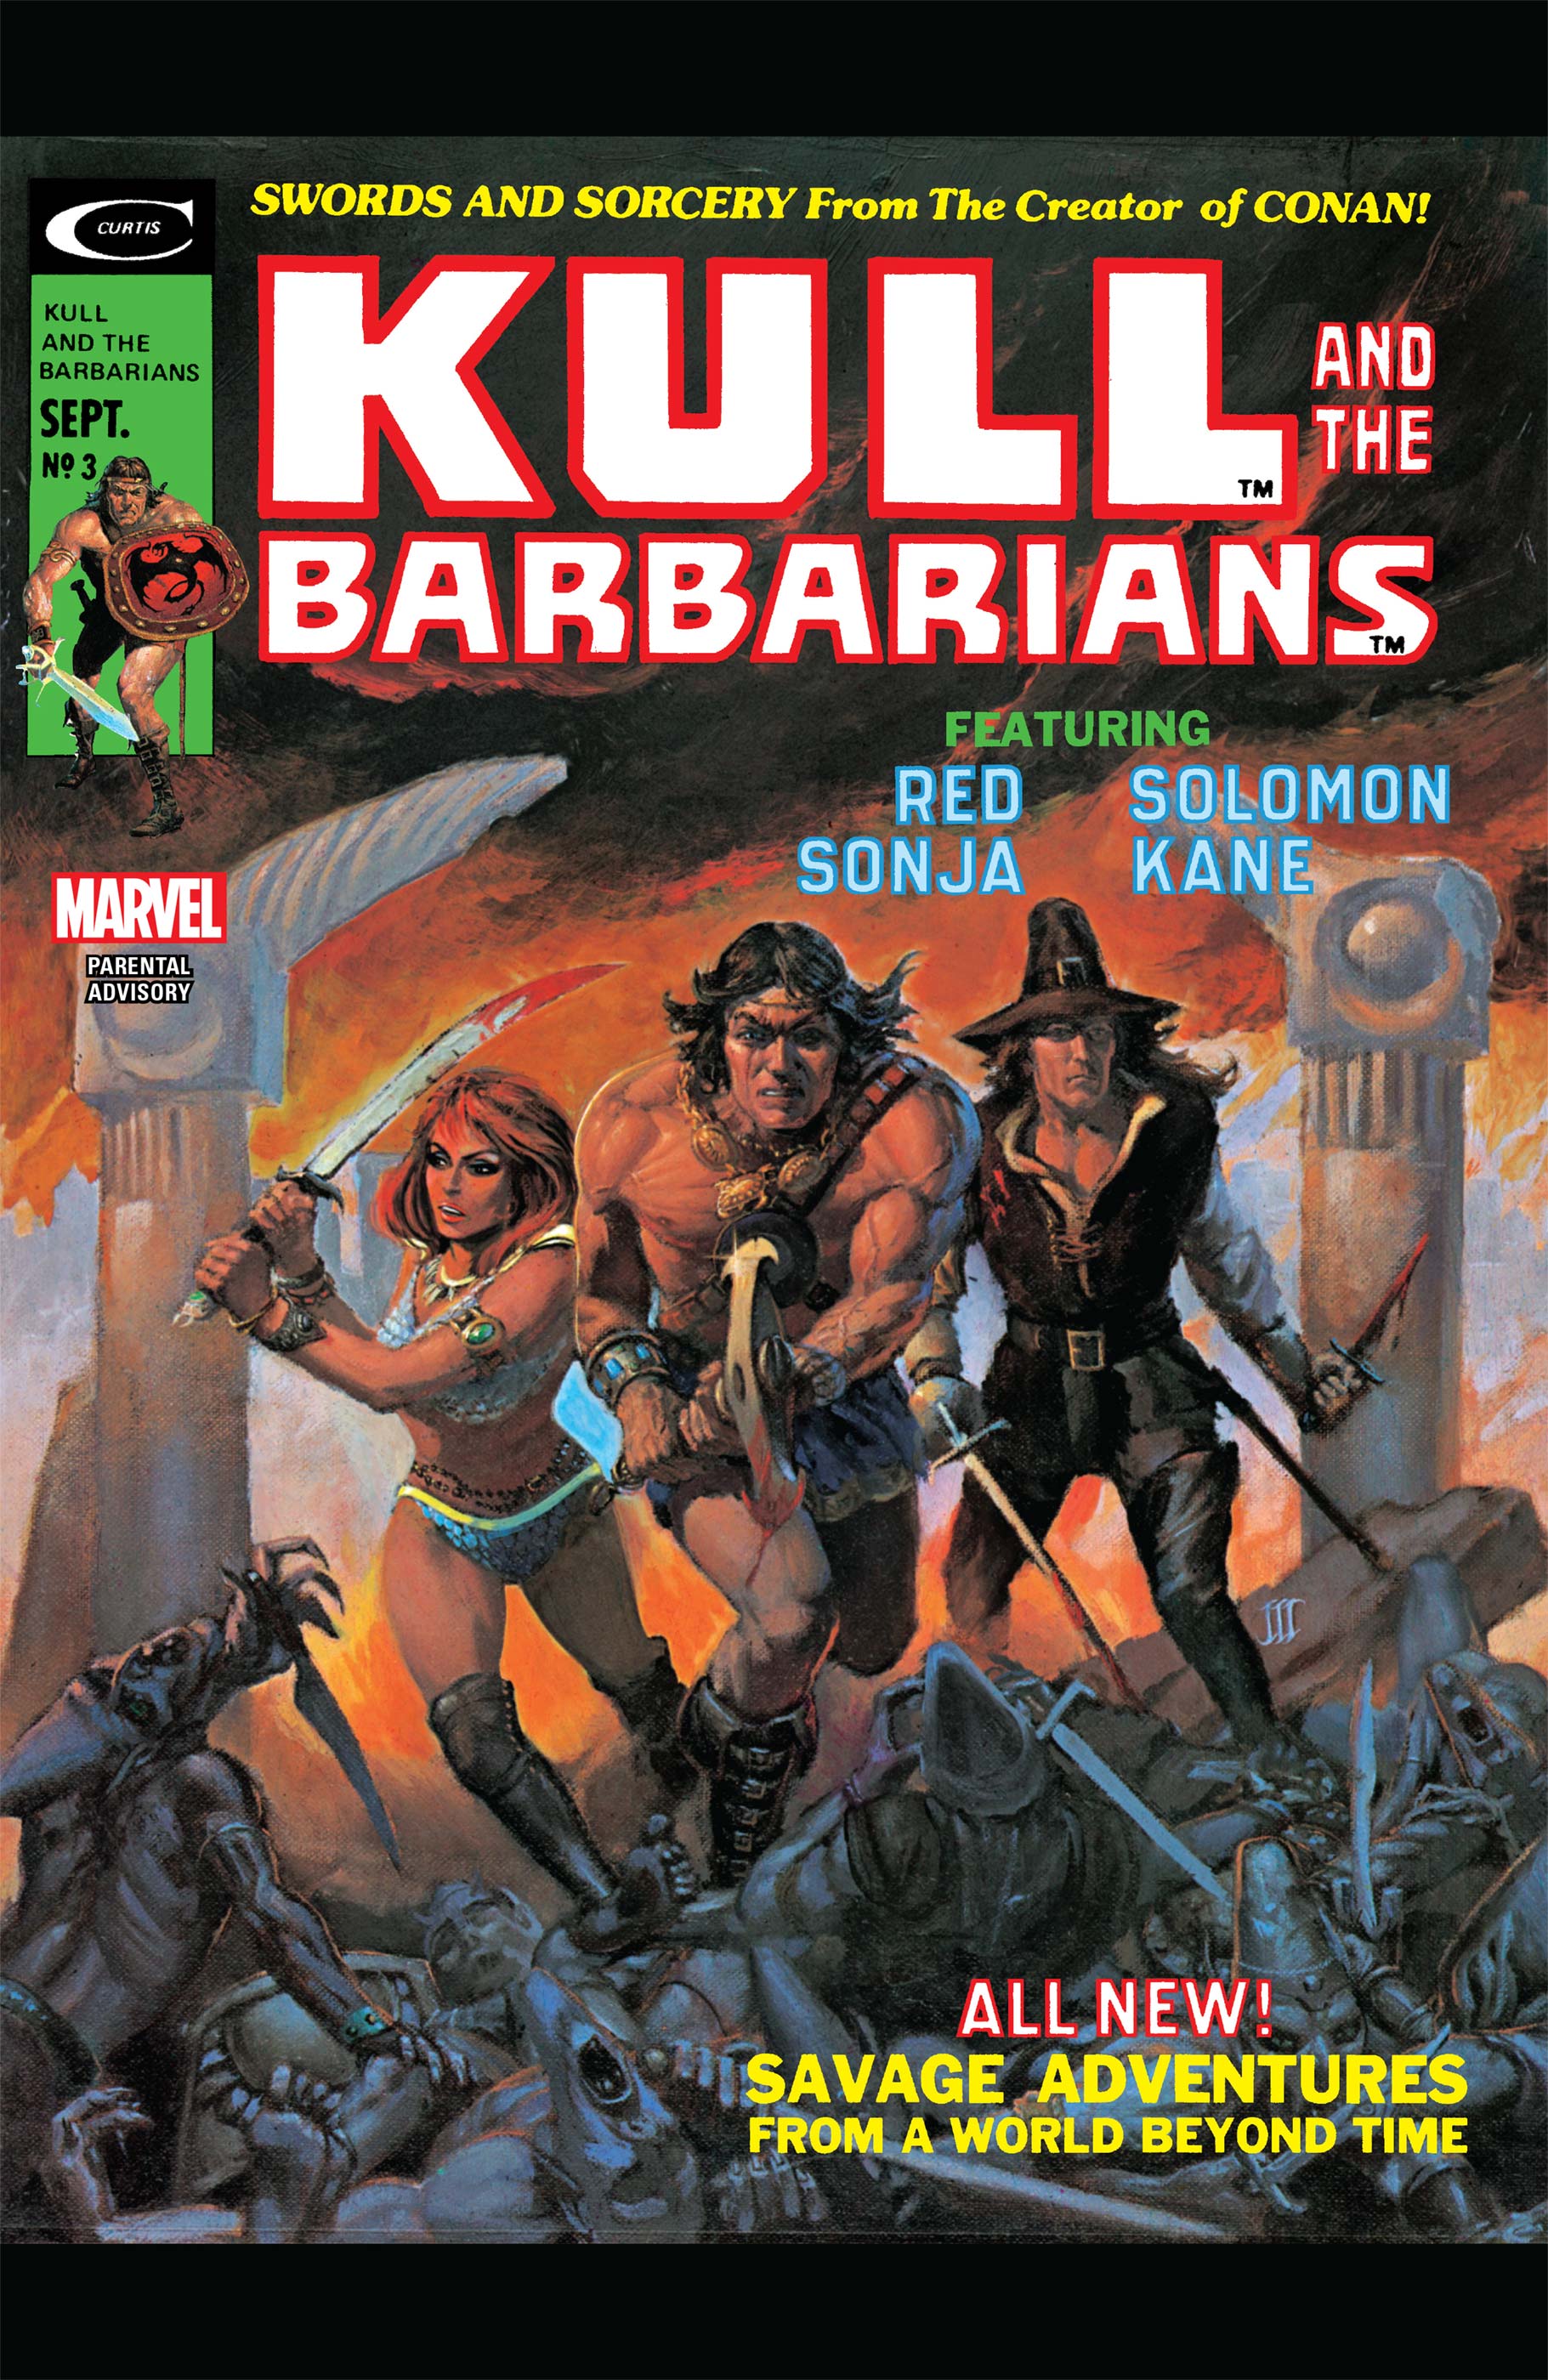 Kull and the Barbarians (1975) #3